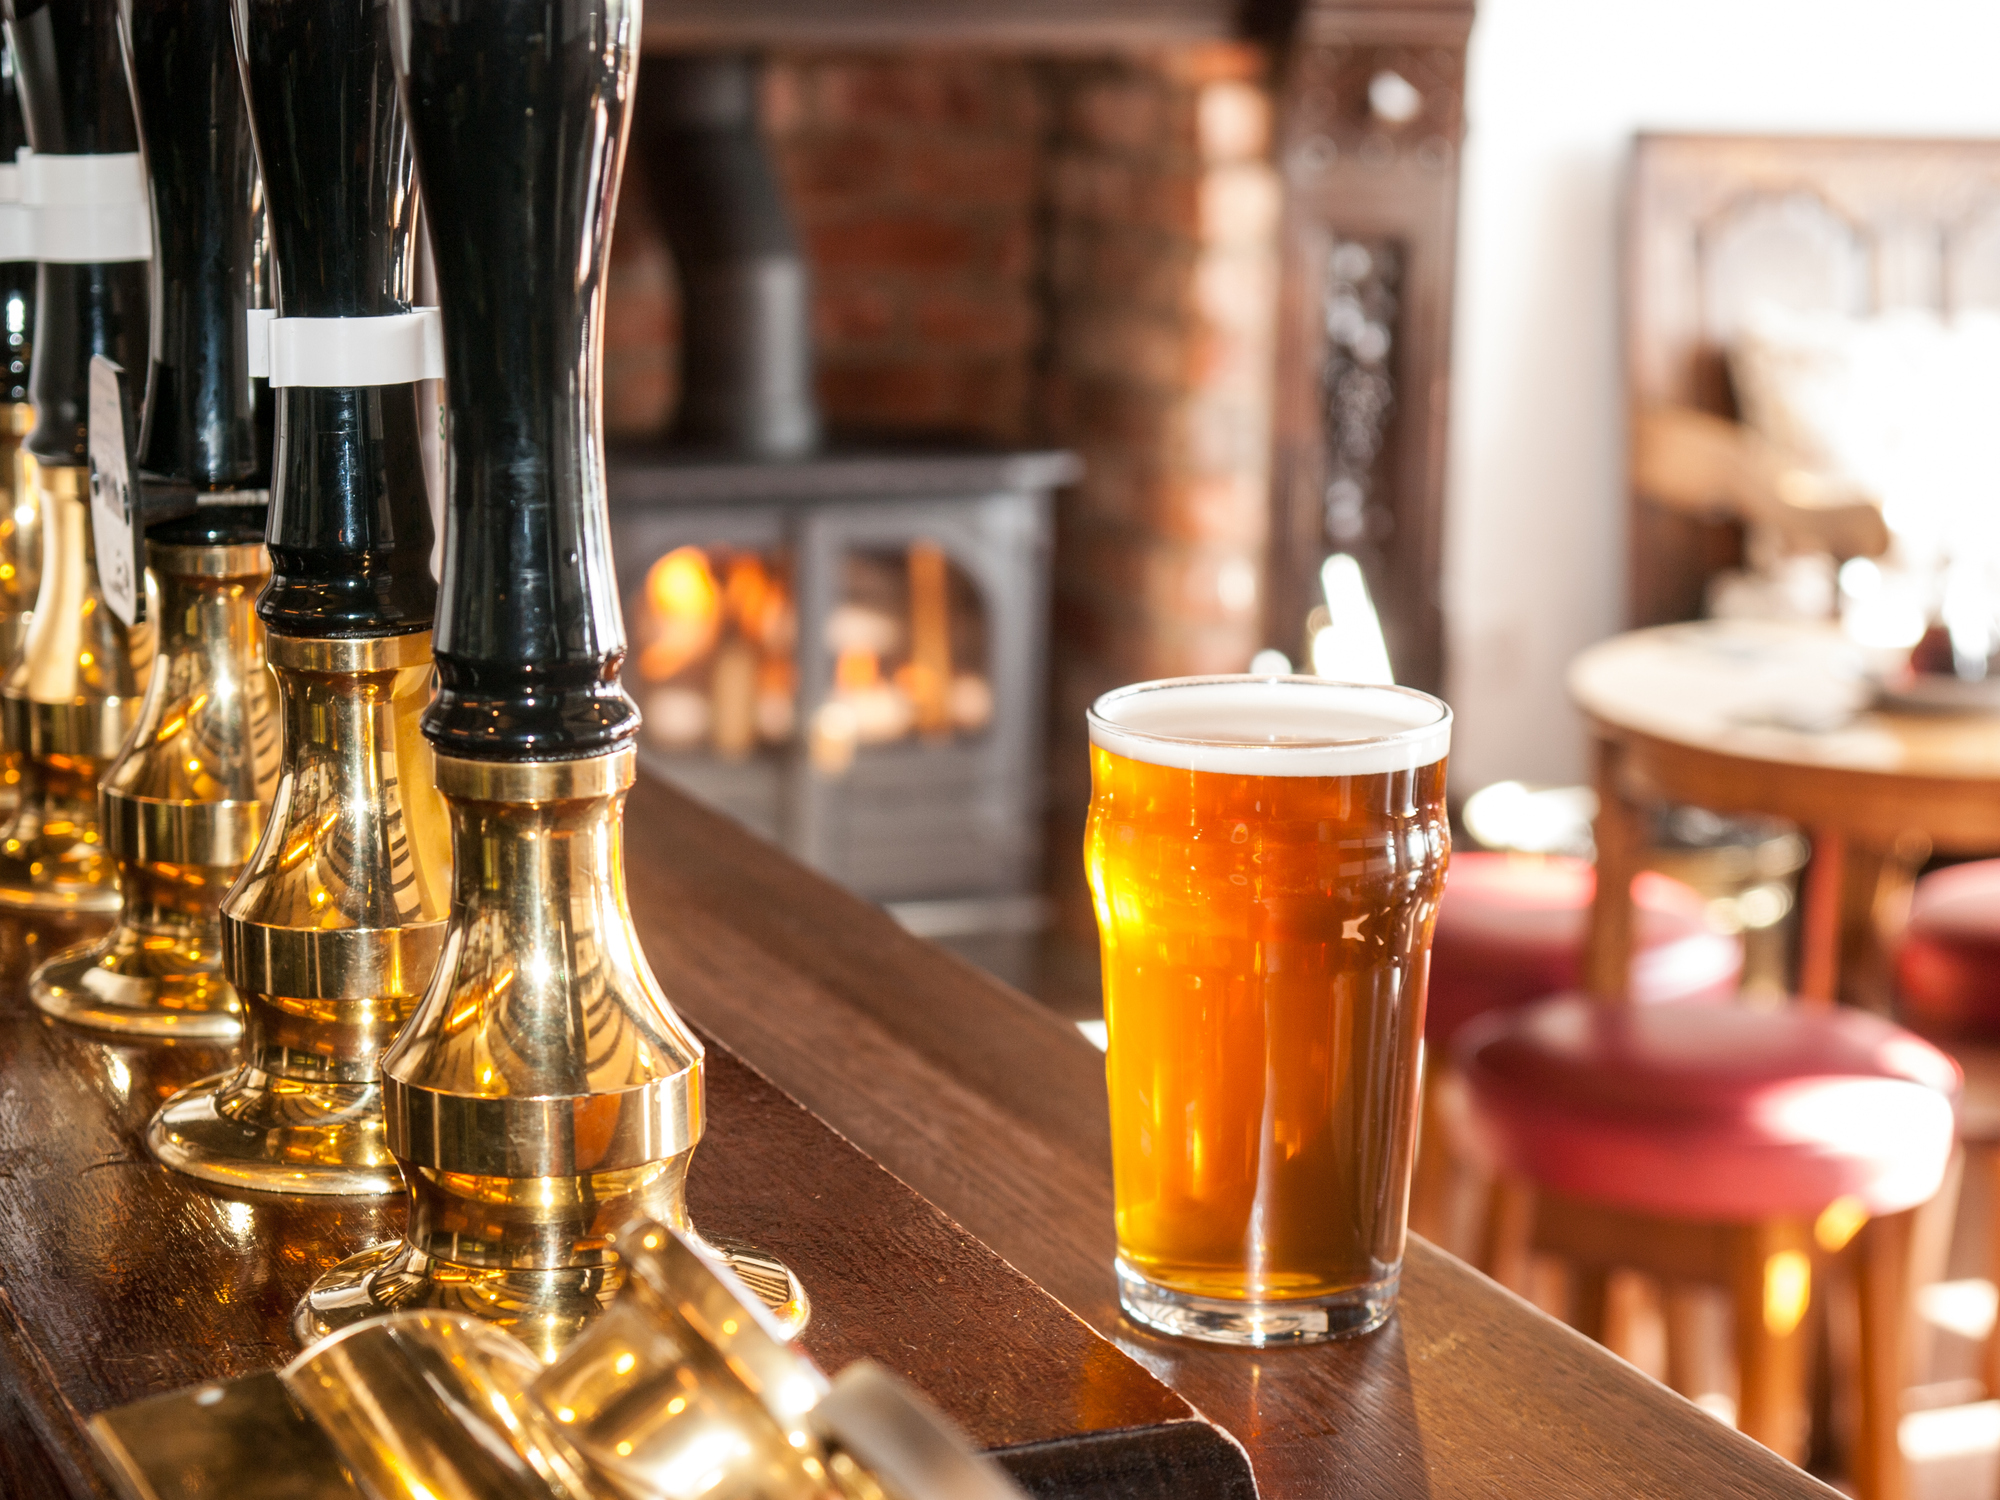 Eight million pints of no and low alcohol beer to be sold this January, but pubs will struggle